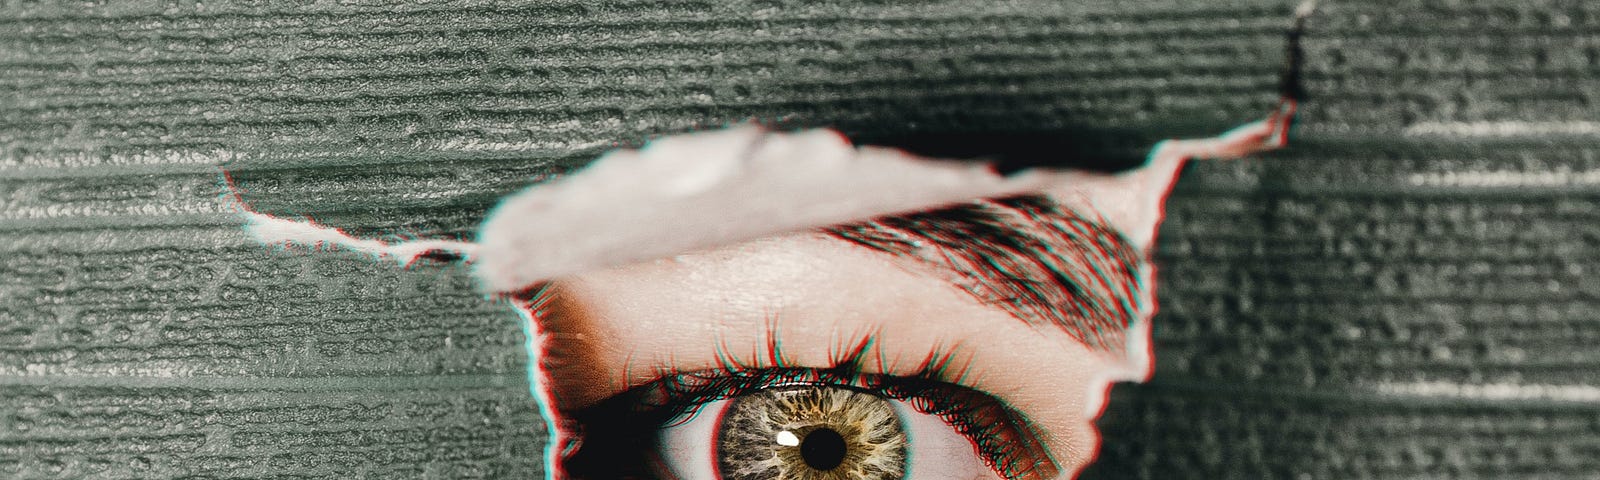 Photo by Jonathan Borba on Unsplash; photo of woman’s eye through paper posted on James Goydos article on computer vision and skin cancer detection